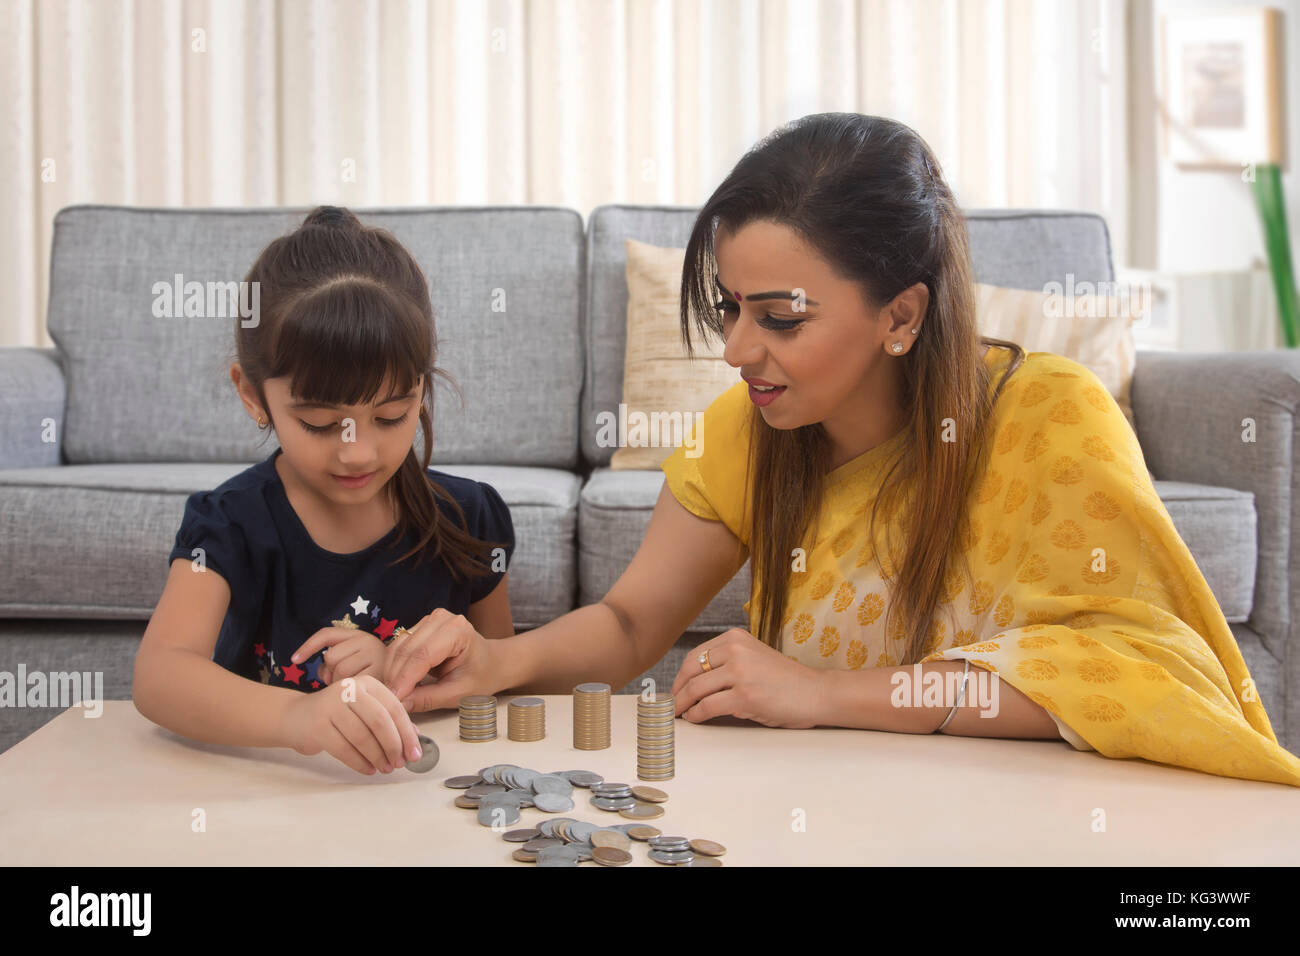 Mother and daughter stacking coins at home Stock Photo